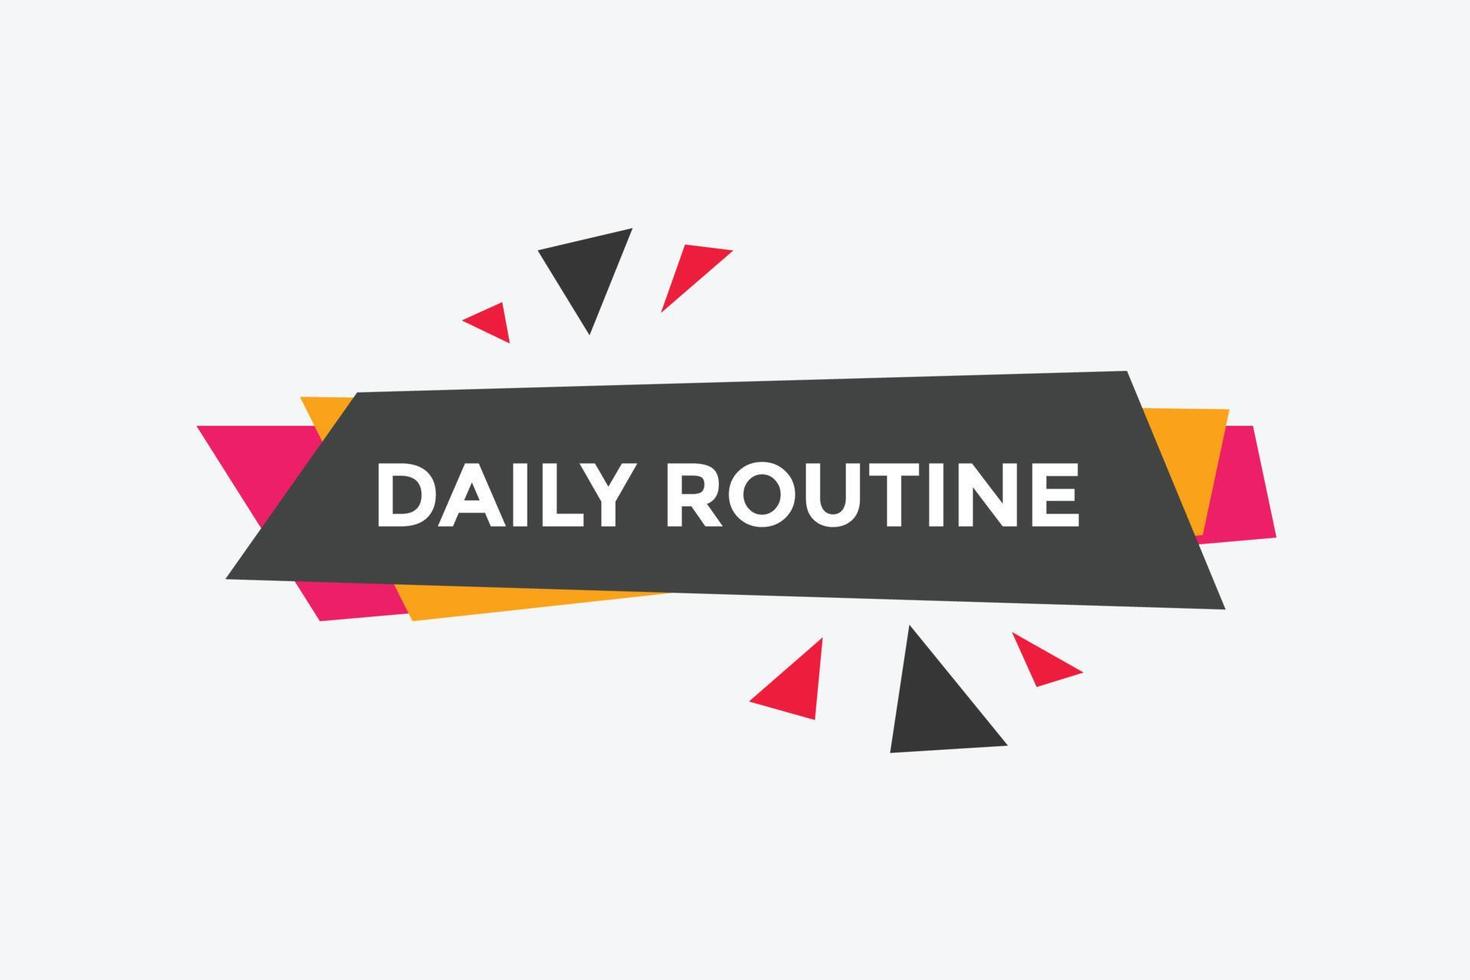 Daily routine button. Daily routine Colorful label sign template. speech bubble vector